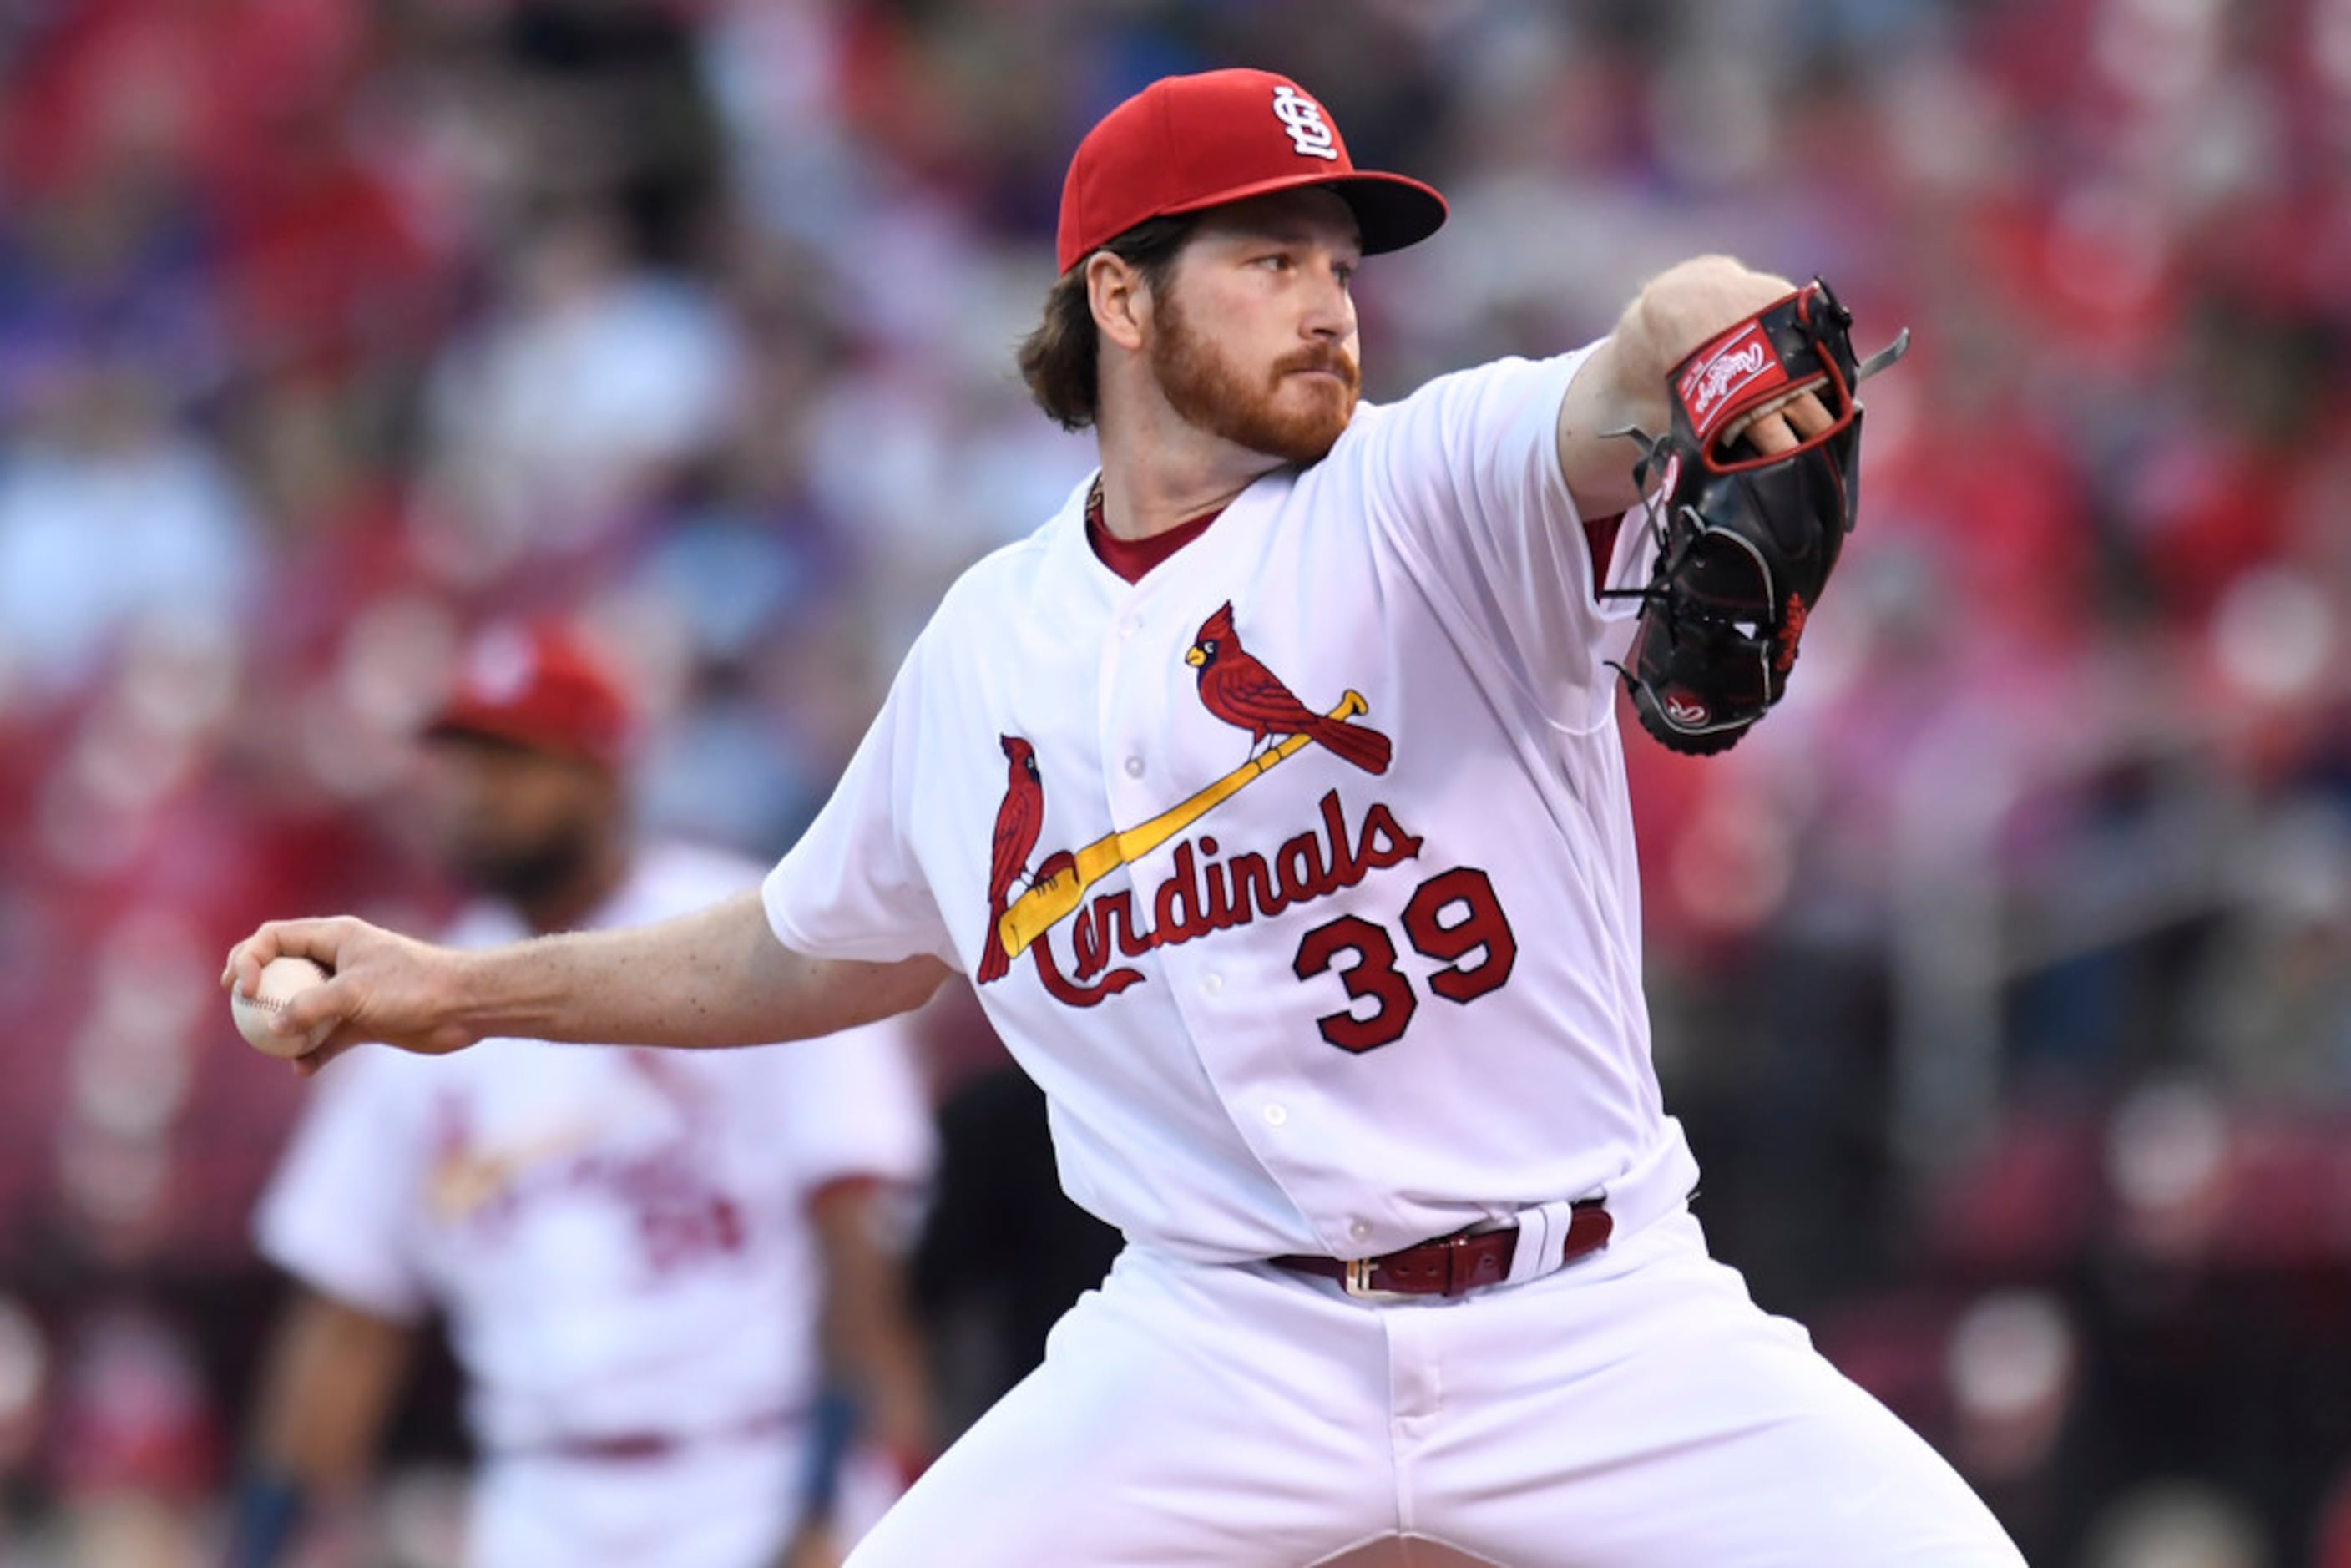 After 3 years in Japan, ex-Rangers pitcher Miles Mikolas resurfaces